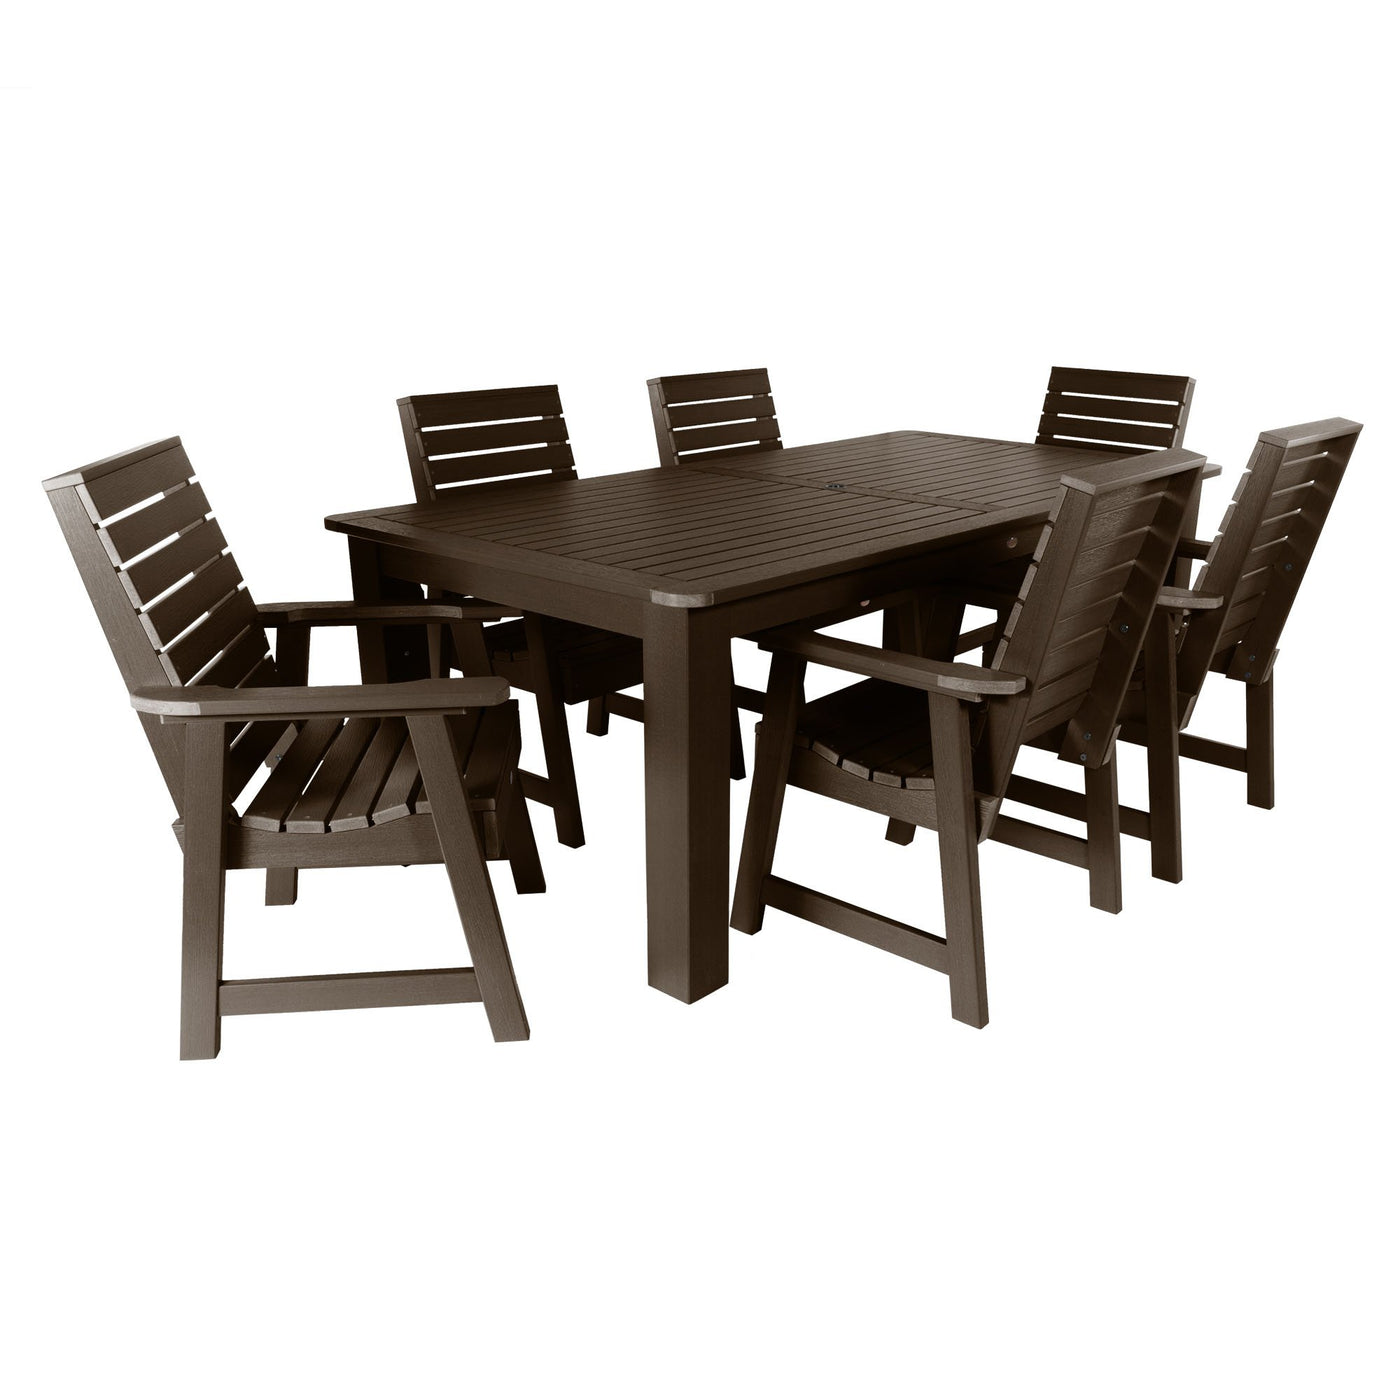 Weatherly 7pc Rectangular Outdoor Dining Set 42in x 84in - Dining Height Dining Highwood USA Weathered Acorn 